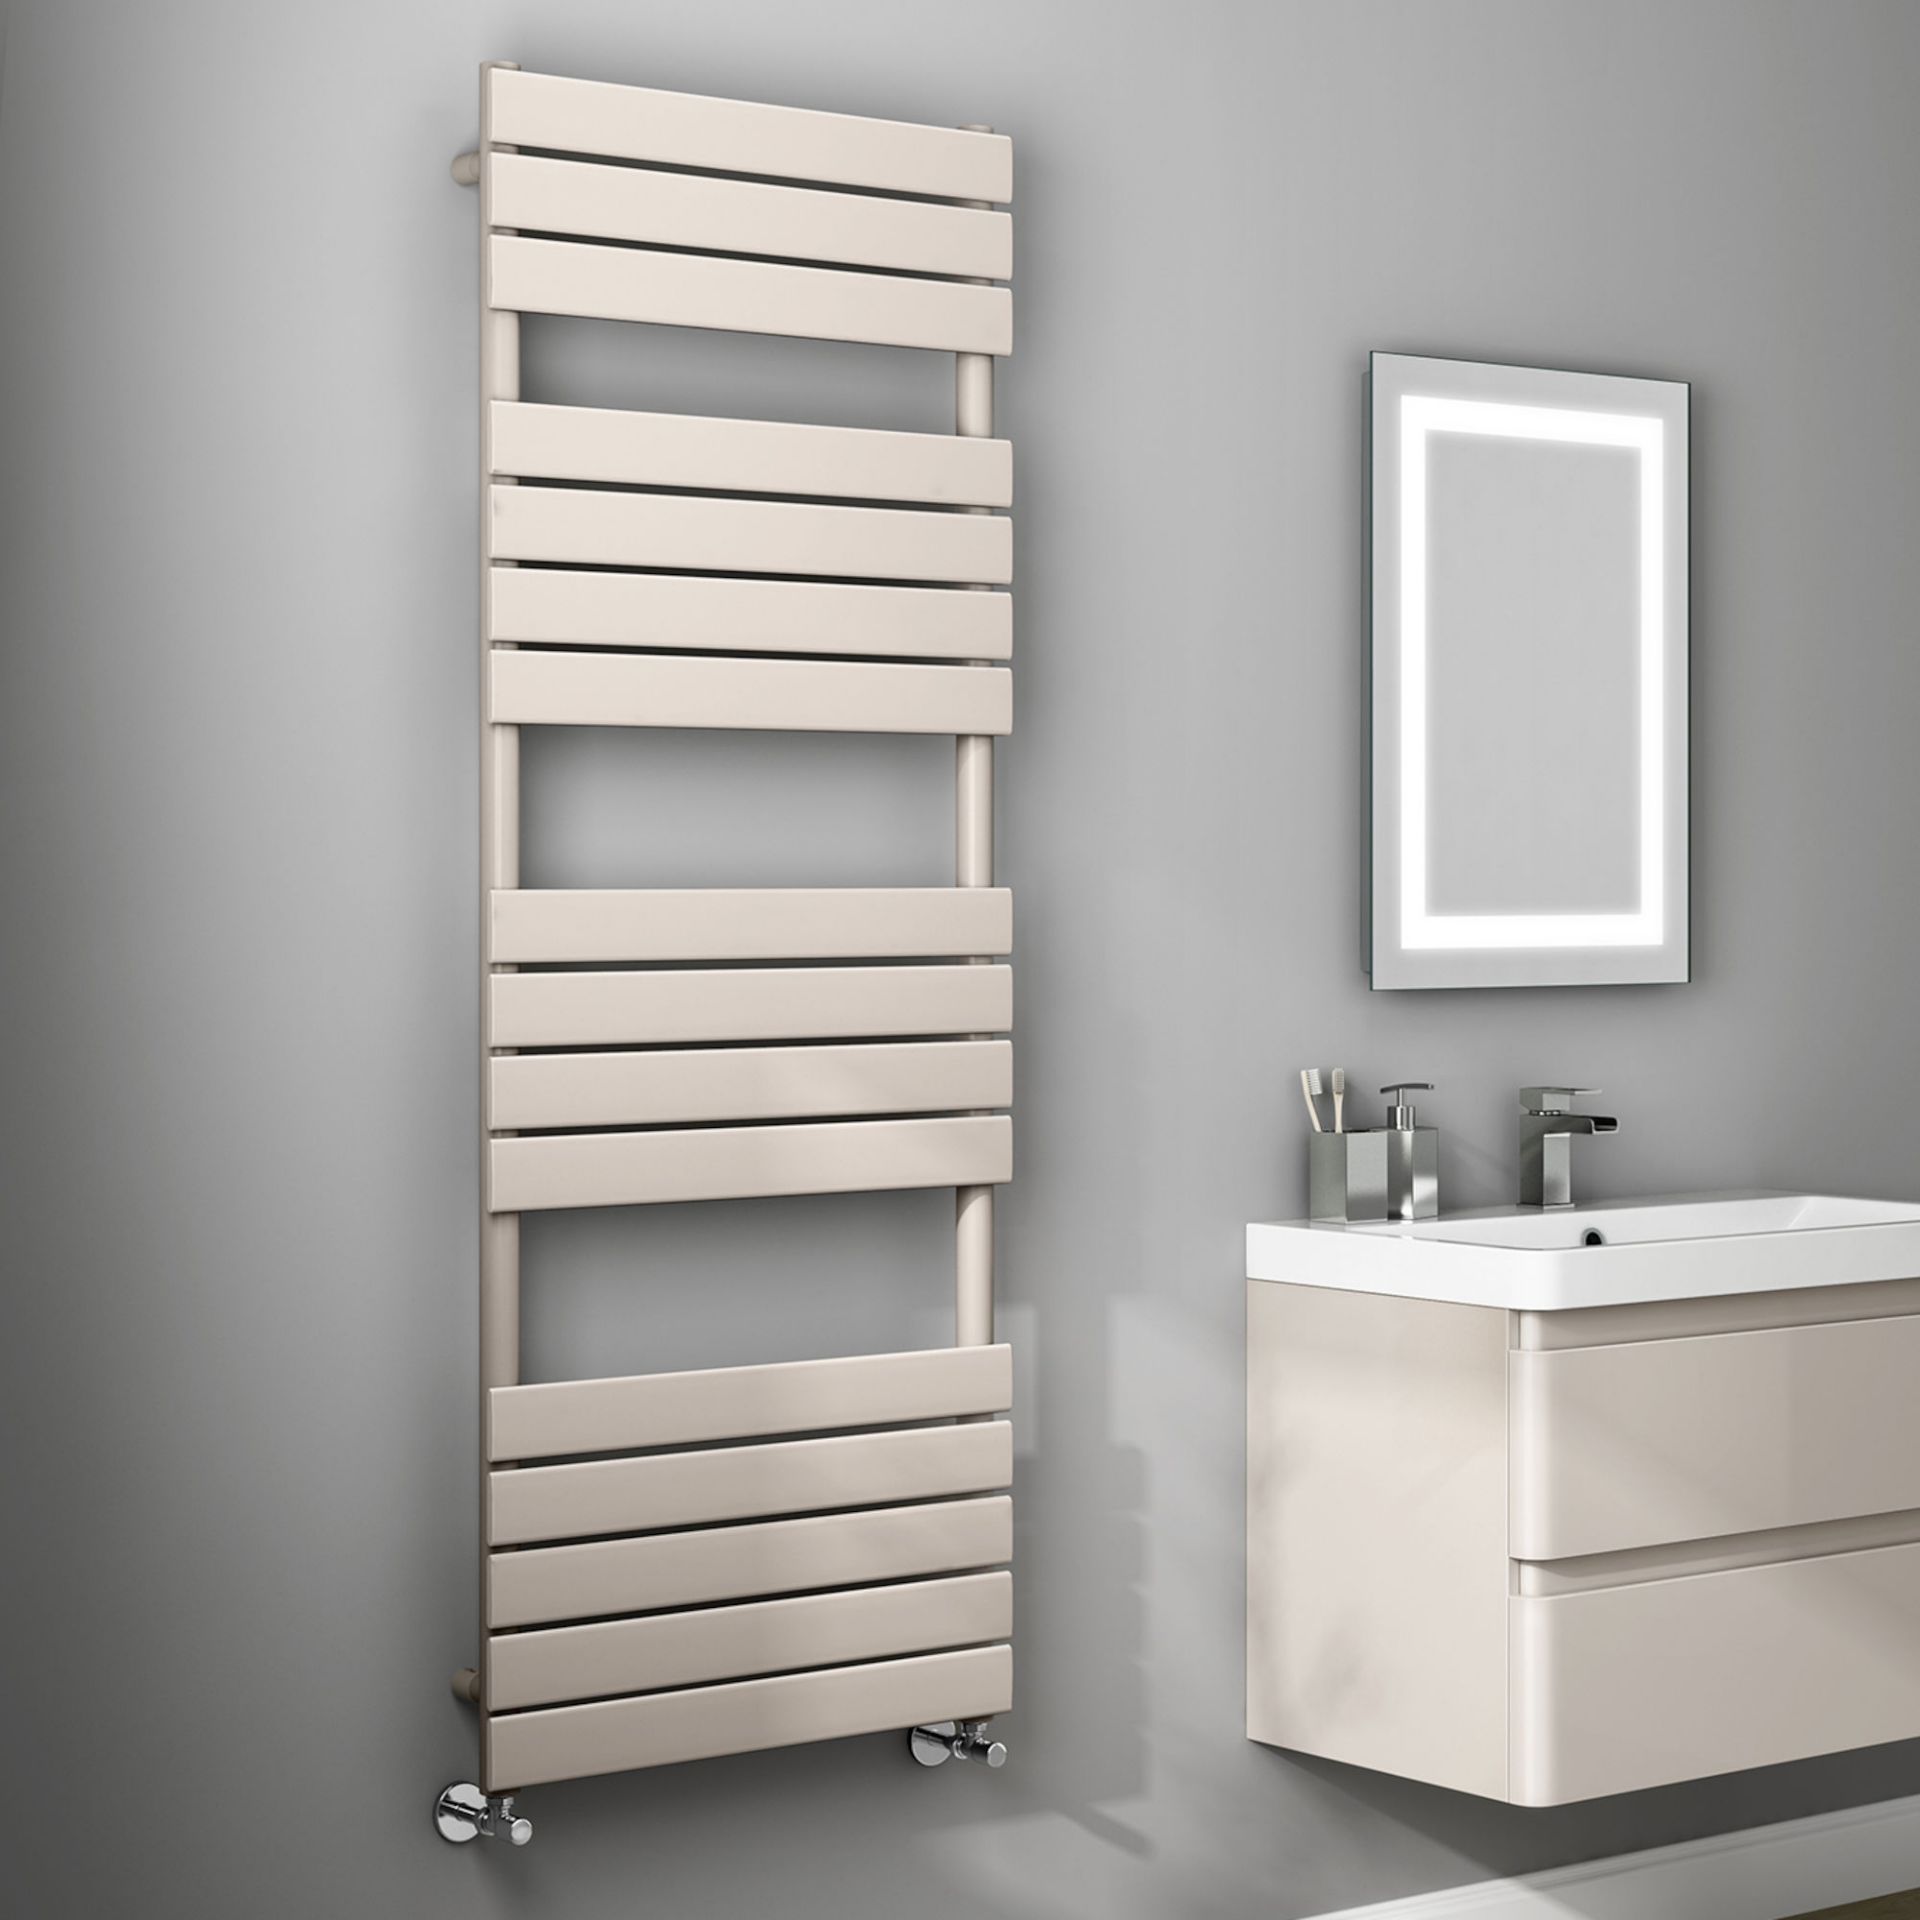 (ED14) 1600x600mm Latte Flat Panel Ladder Towel Radiator. Made from high quality low carbon steel.